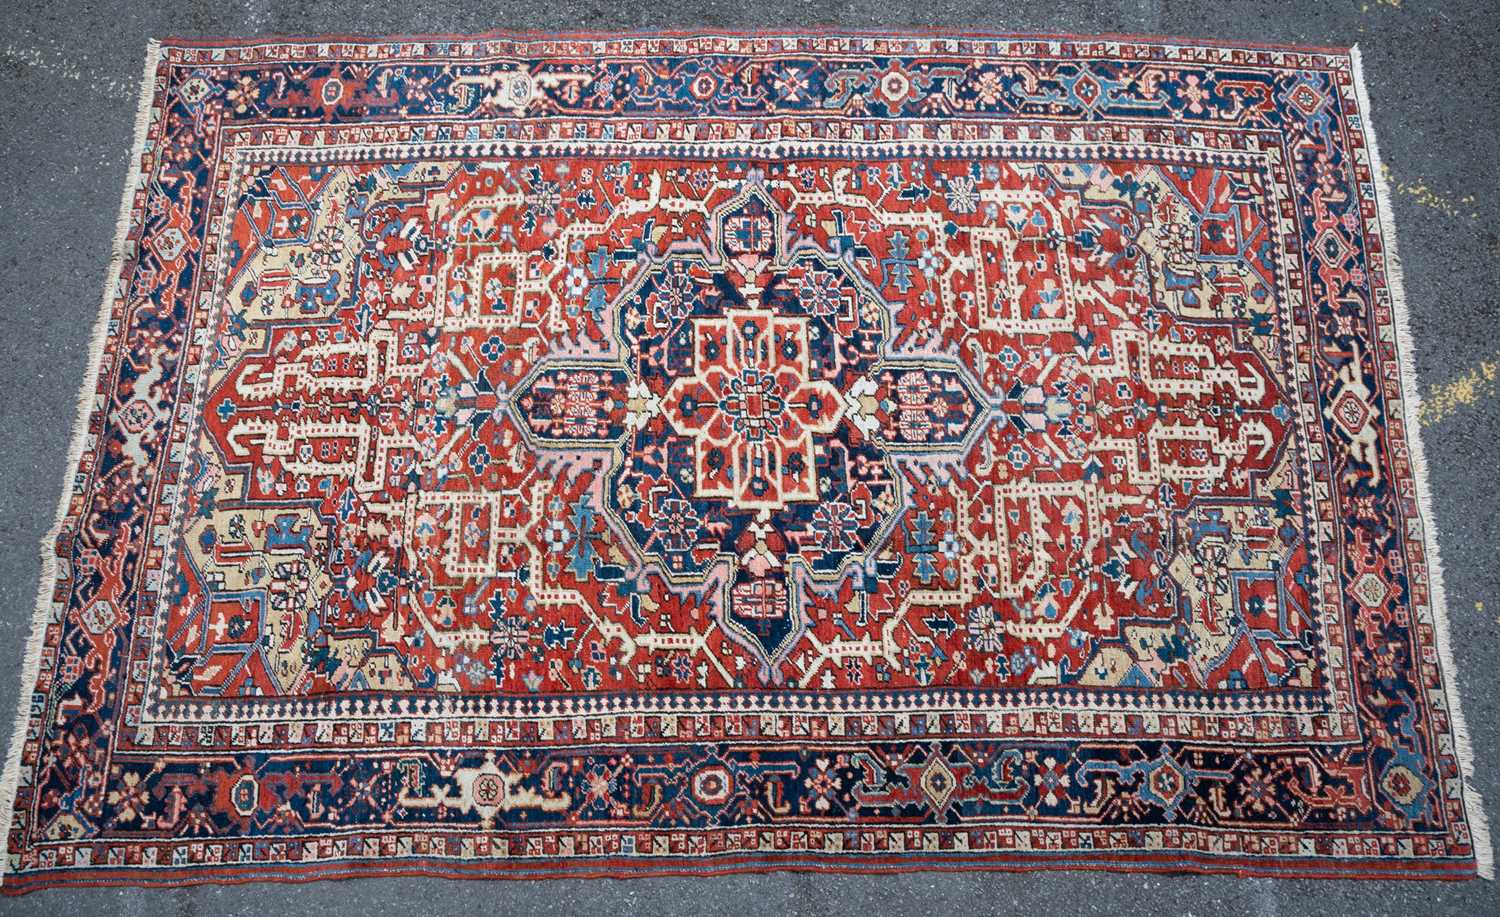 A red ground Heritz rug with geometric ornament to the central field and within a multiple banded